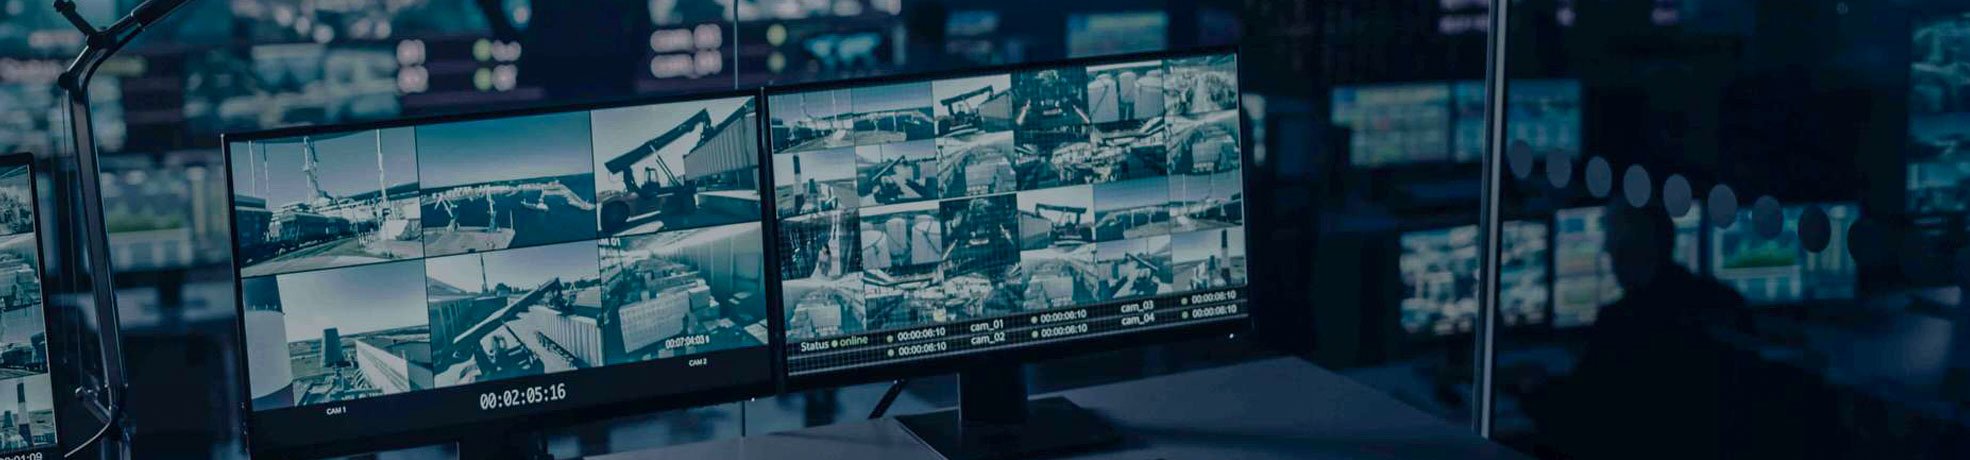 Video Analytics | All Security Equipment